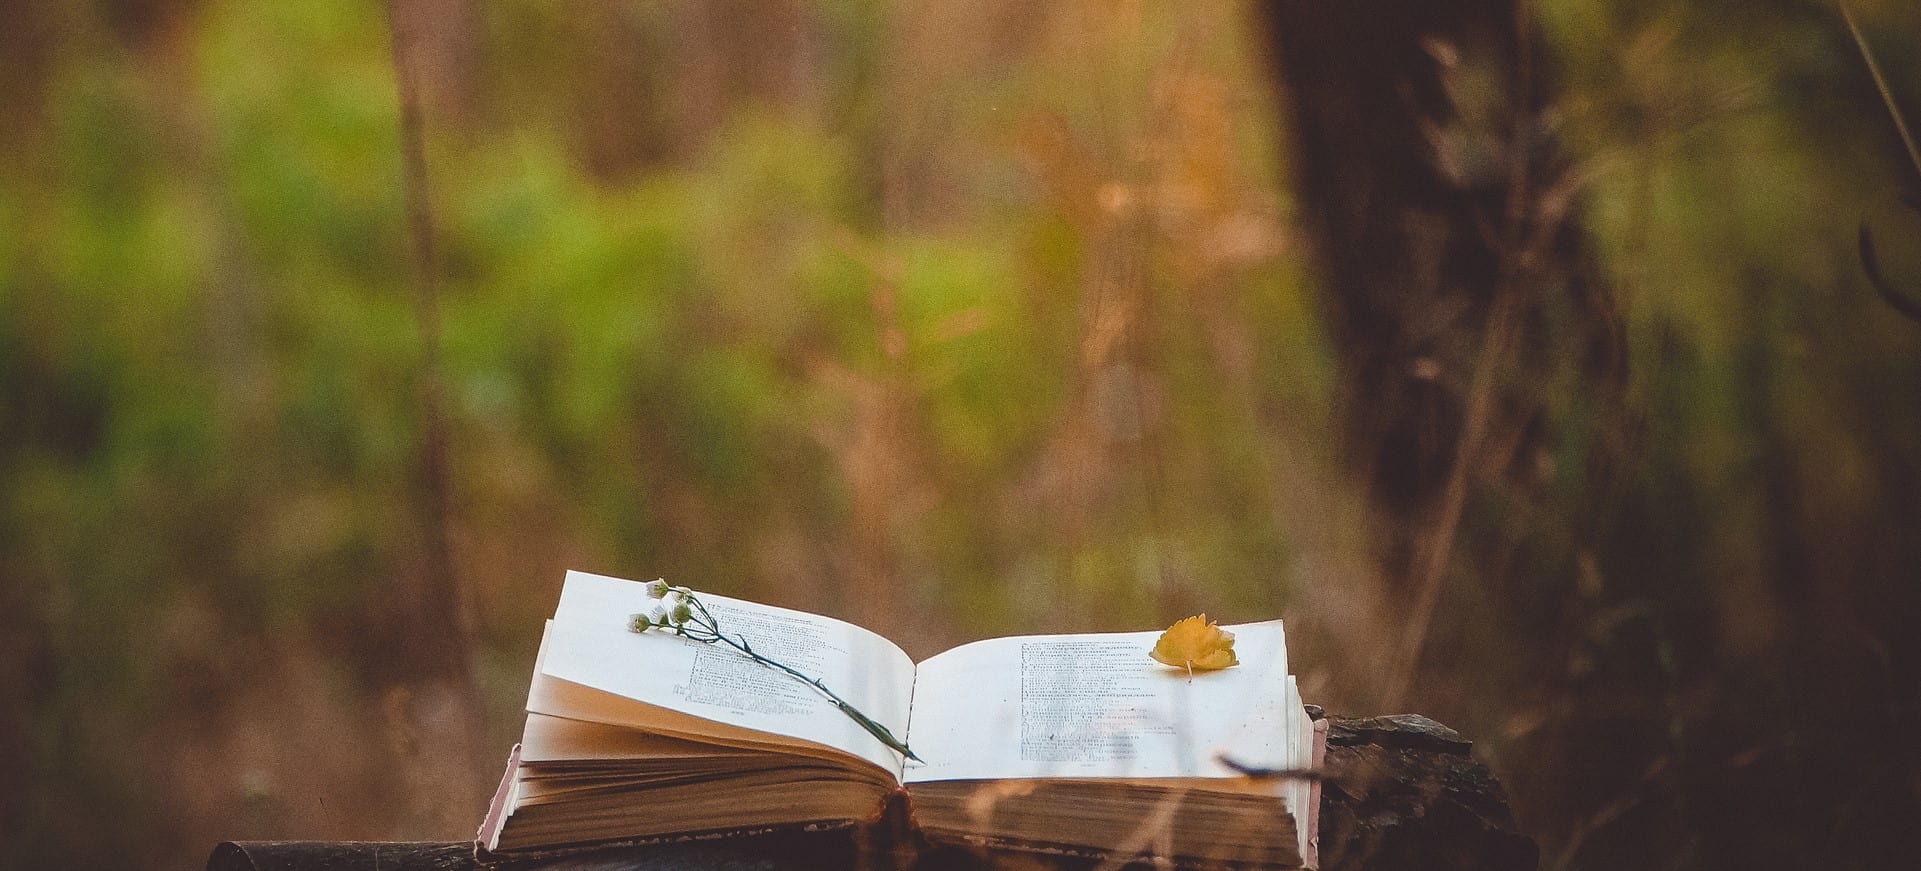 An open book with nature landscape in the background